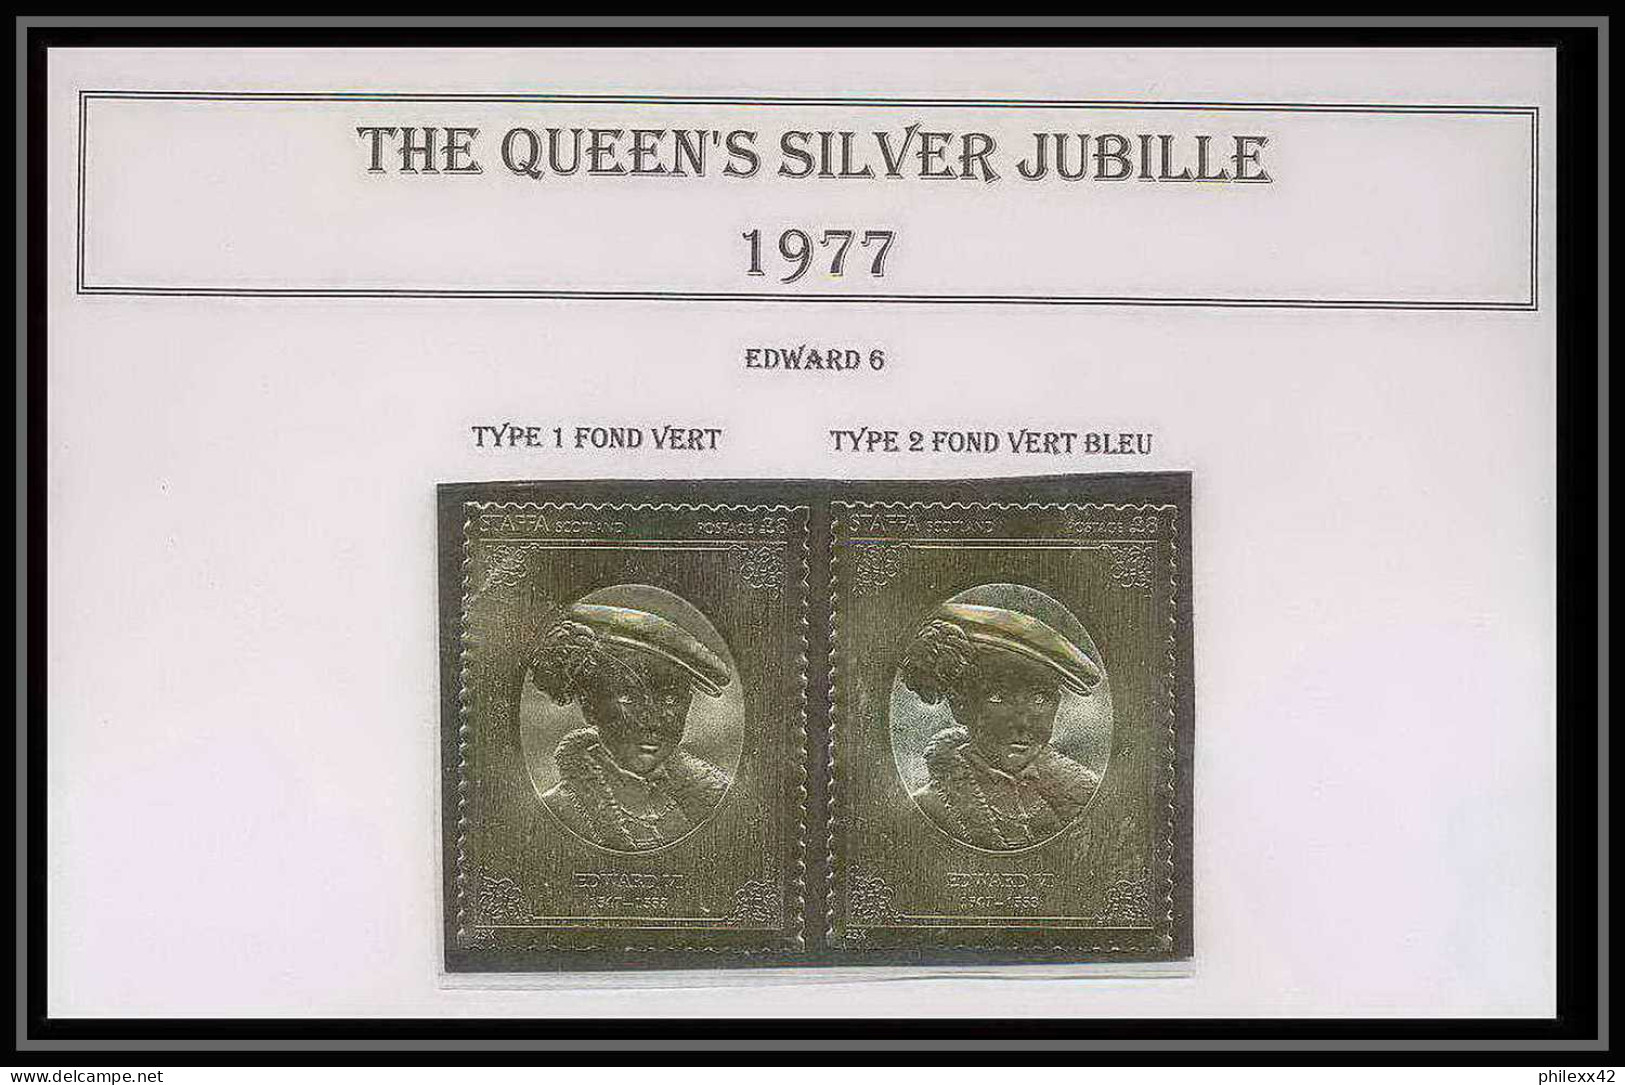 460 Staffa Scotland The Queen's Silver Jubilee 1977 OR Gold Stamps Monarchy United Kingdom Edward 6 Type 1&2 Neuf** Mnh - Emissione Locali